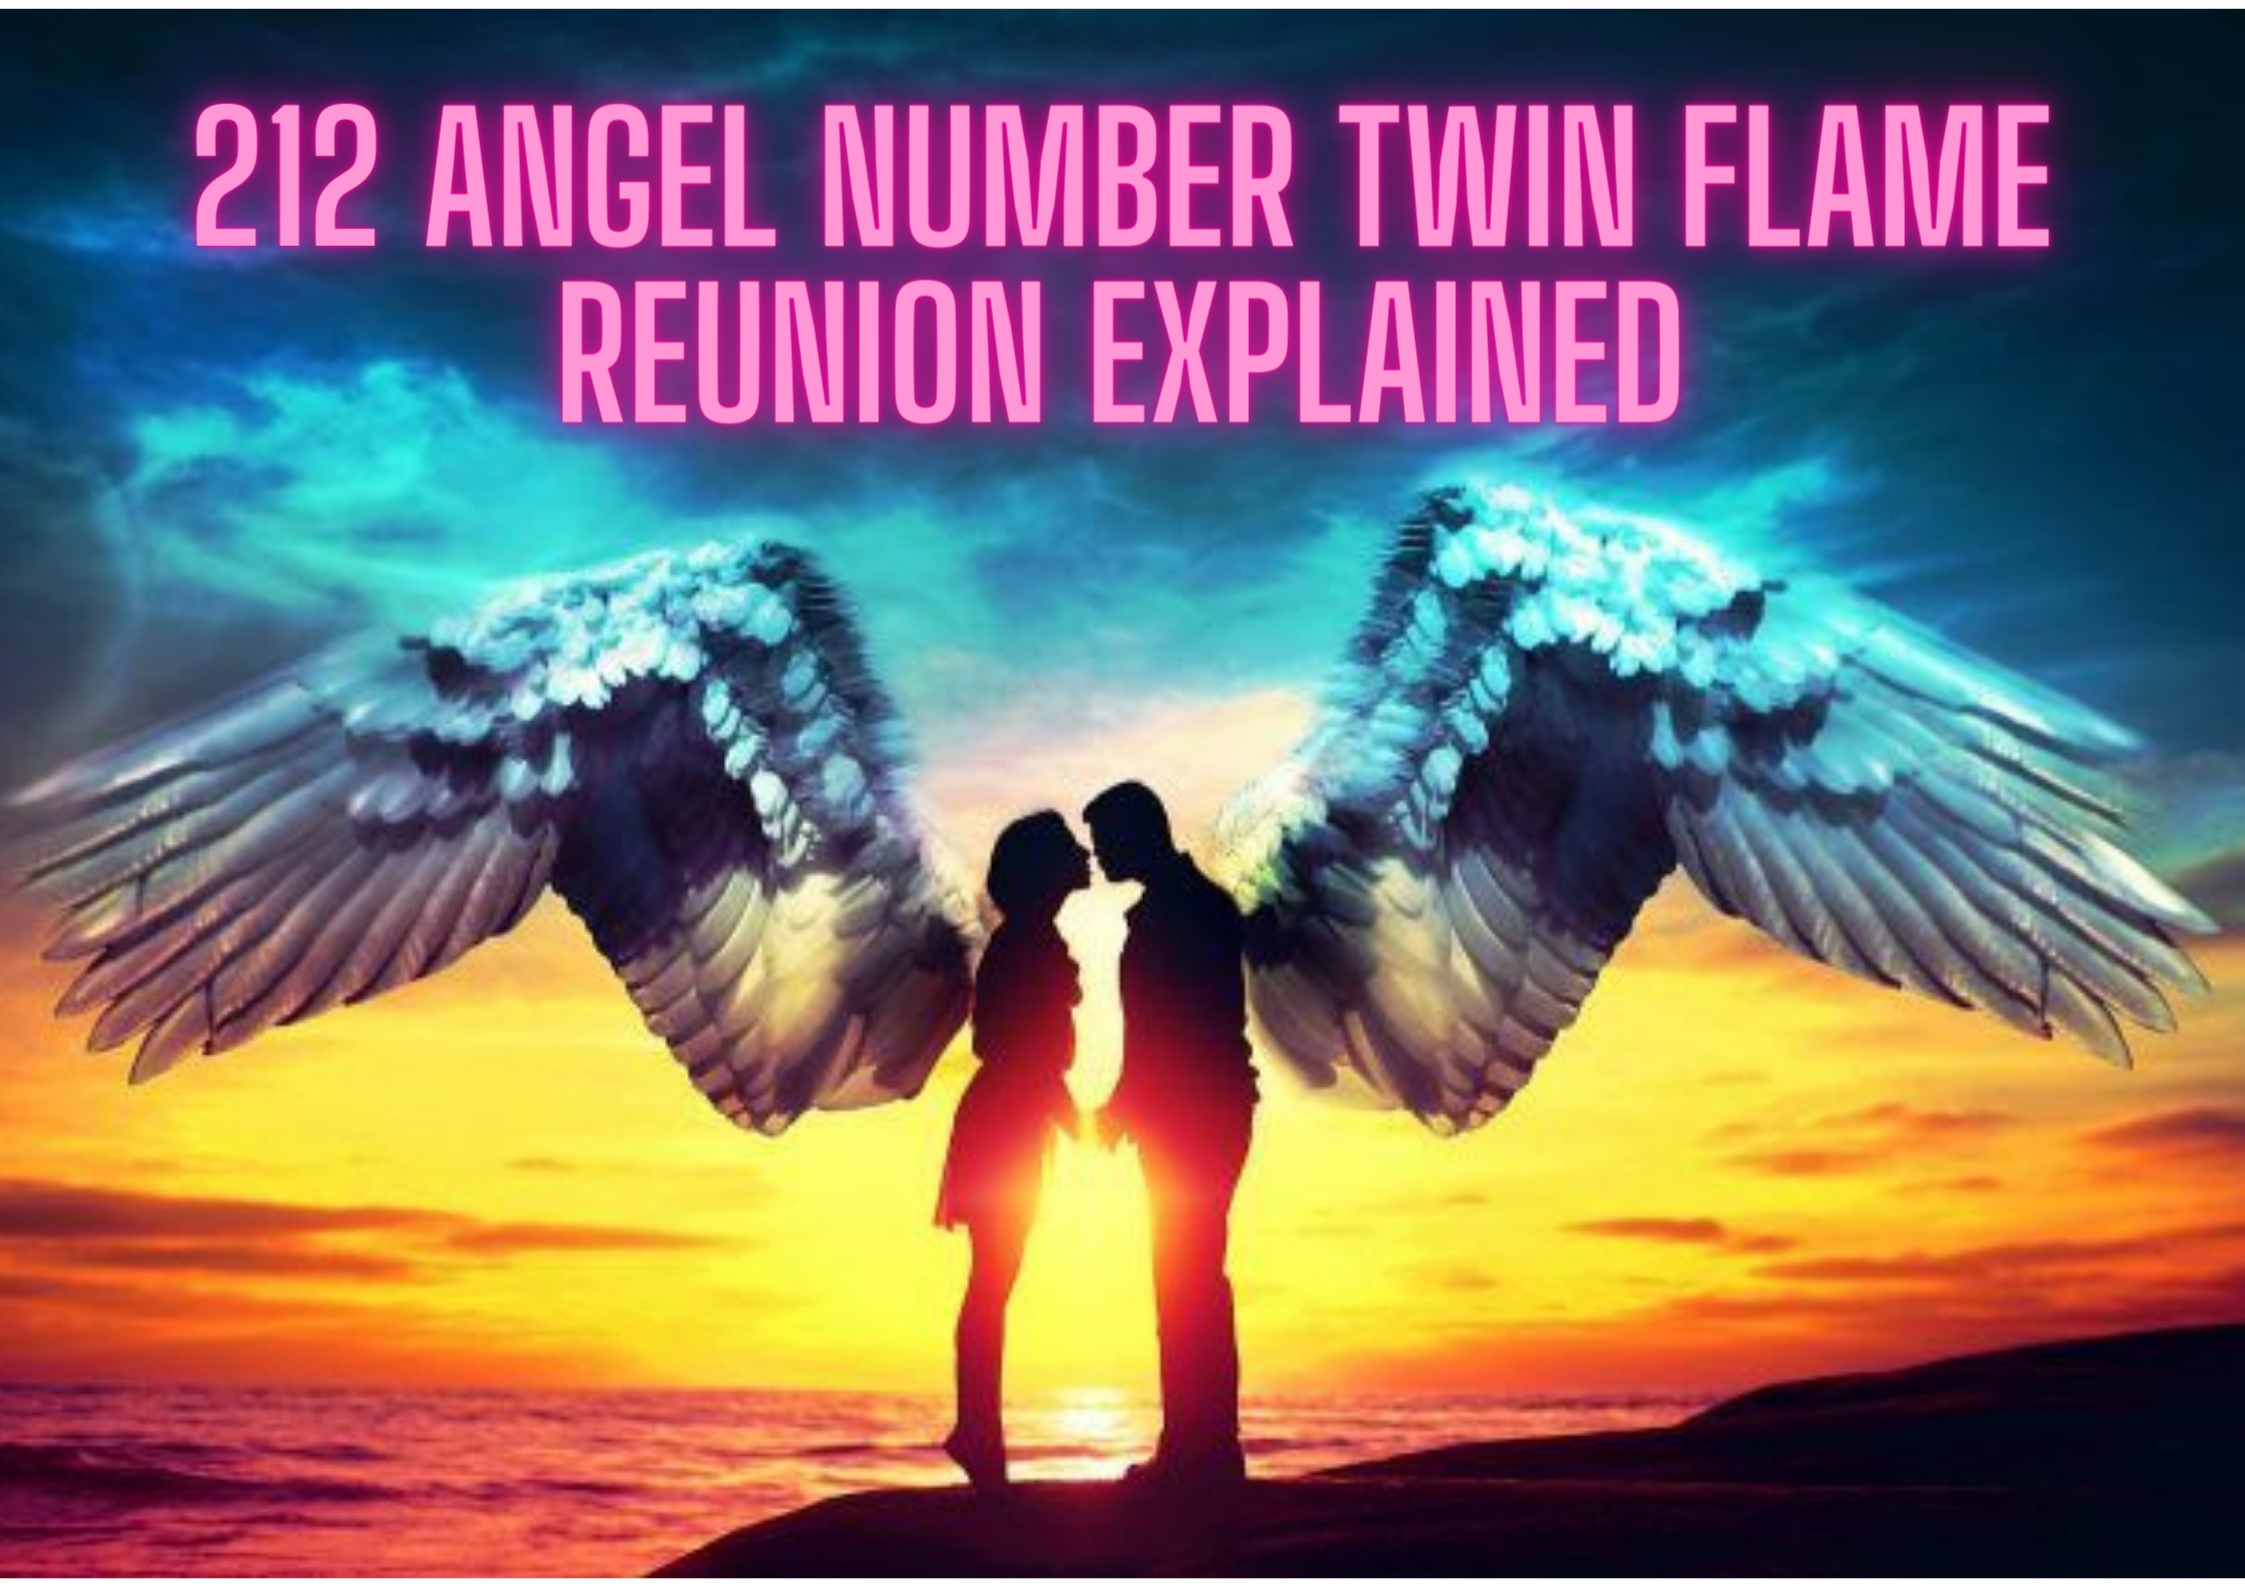 Two angels facing each other with words 212 Angel Number Twin Flame Reunion Explained